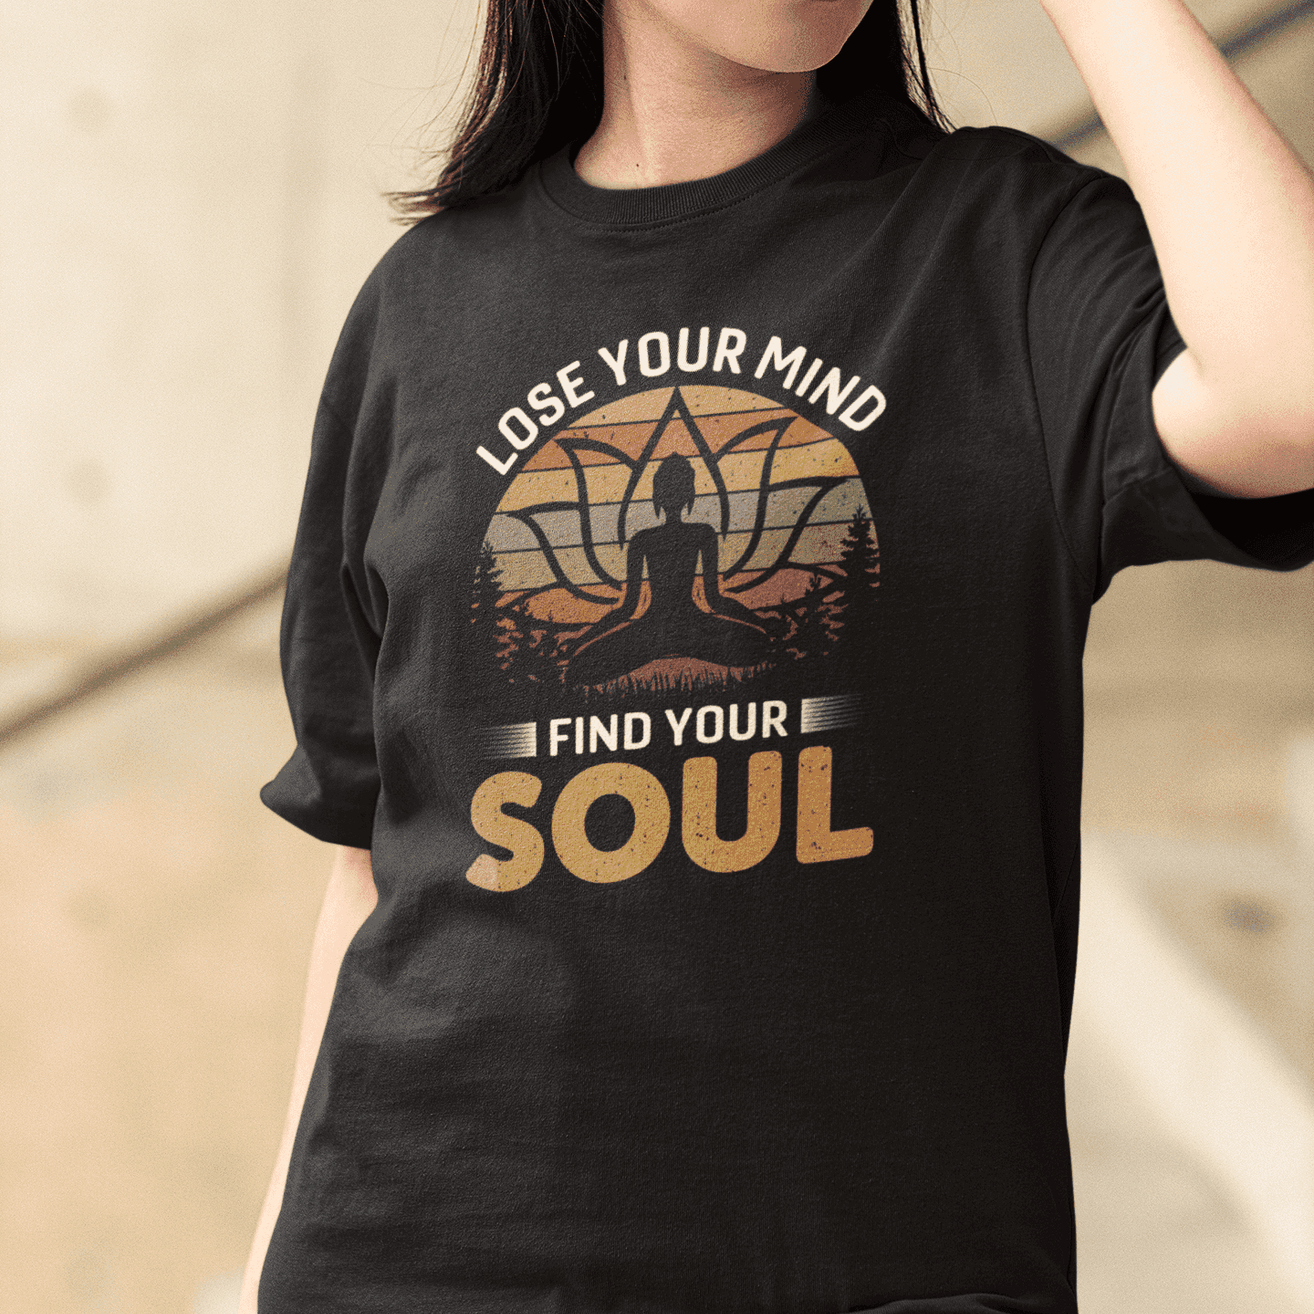 "Lose Your Mind, Find Your Soul" Yoga Day Women's Cotton Oversized T-Shirt